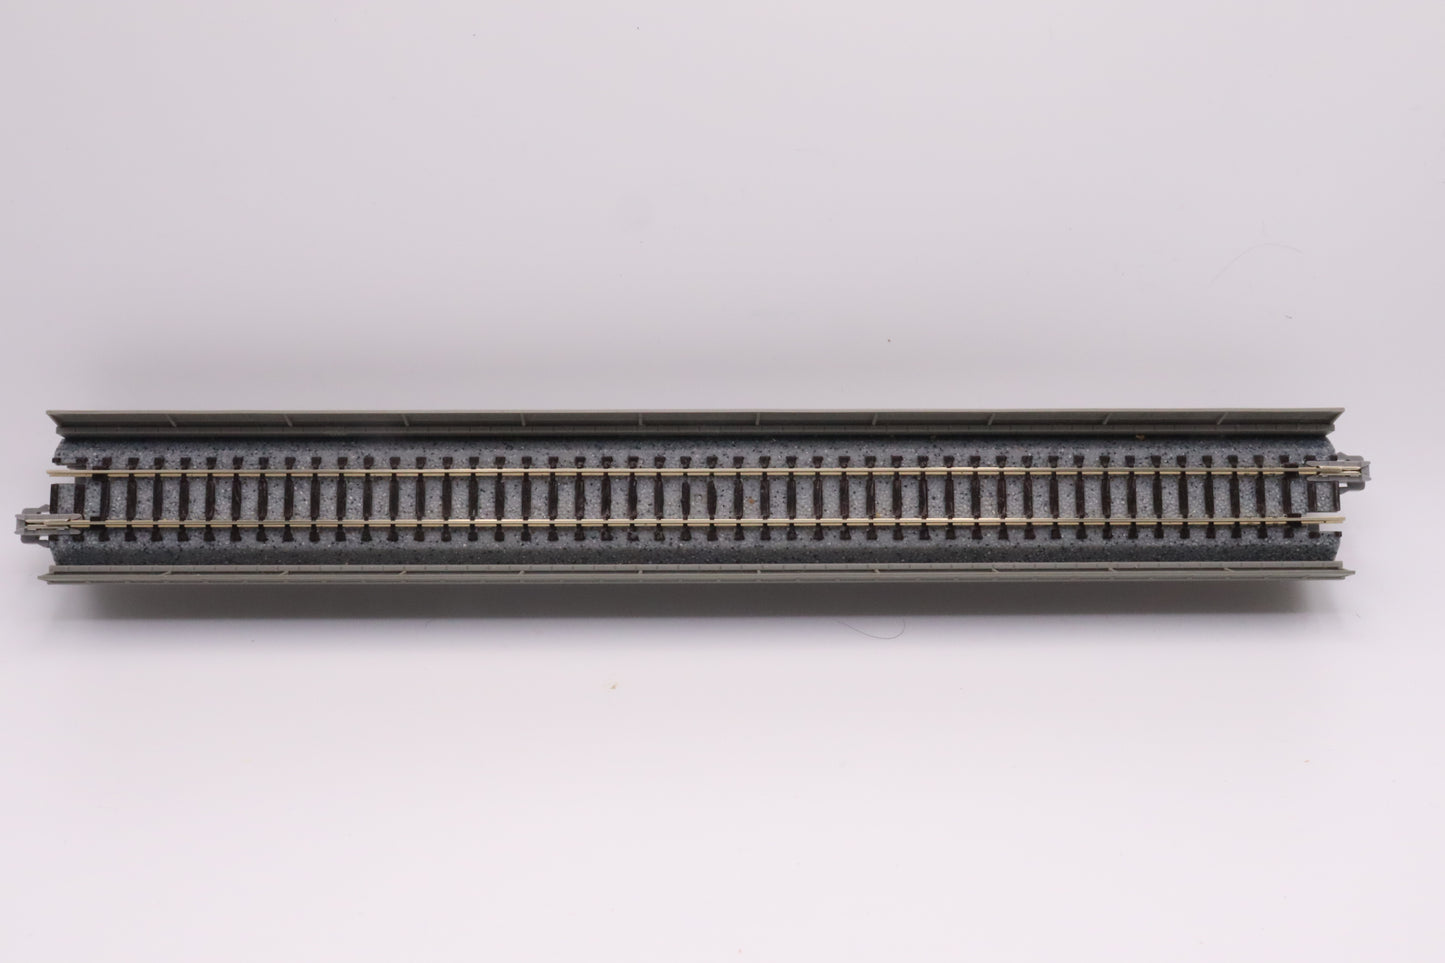 KAT-20-400 - Straight Viaduct Track - 9 3/4" (248mm) Unitrack - 1 pc, Loose, No Package